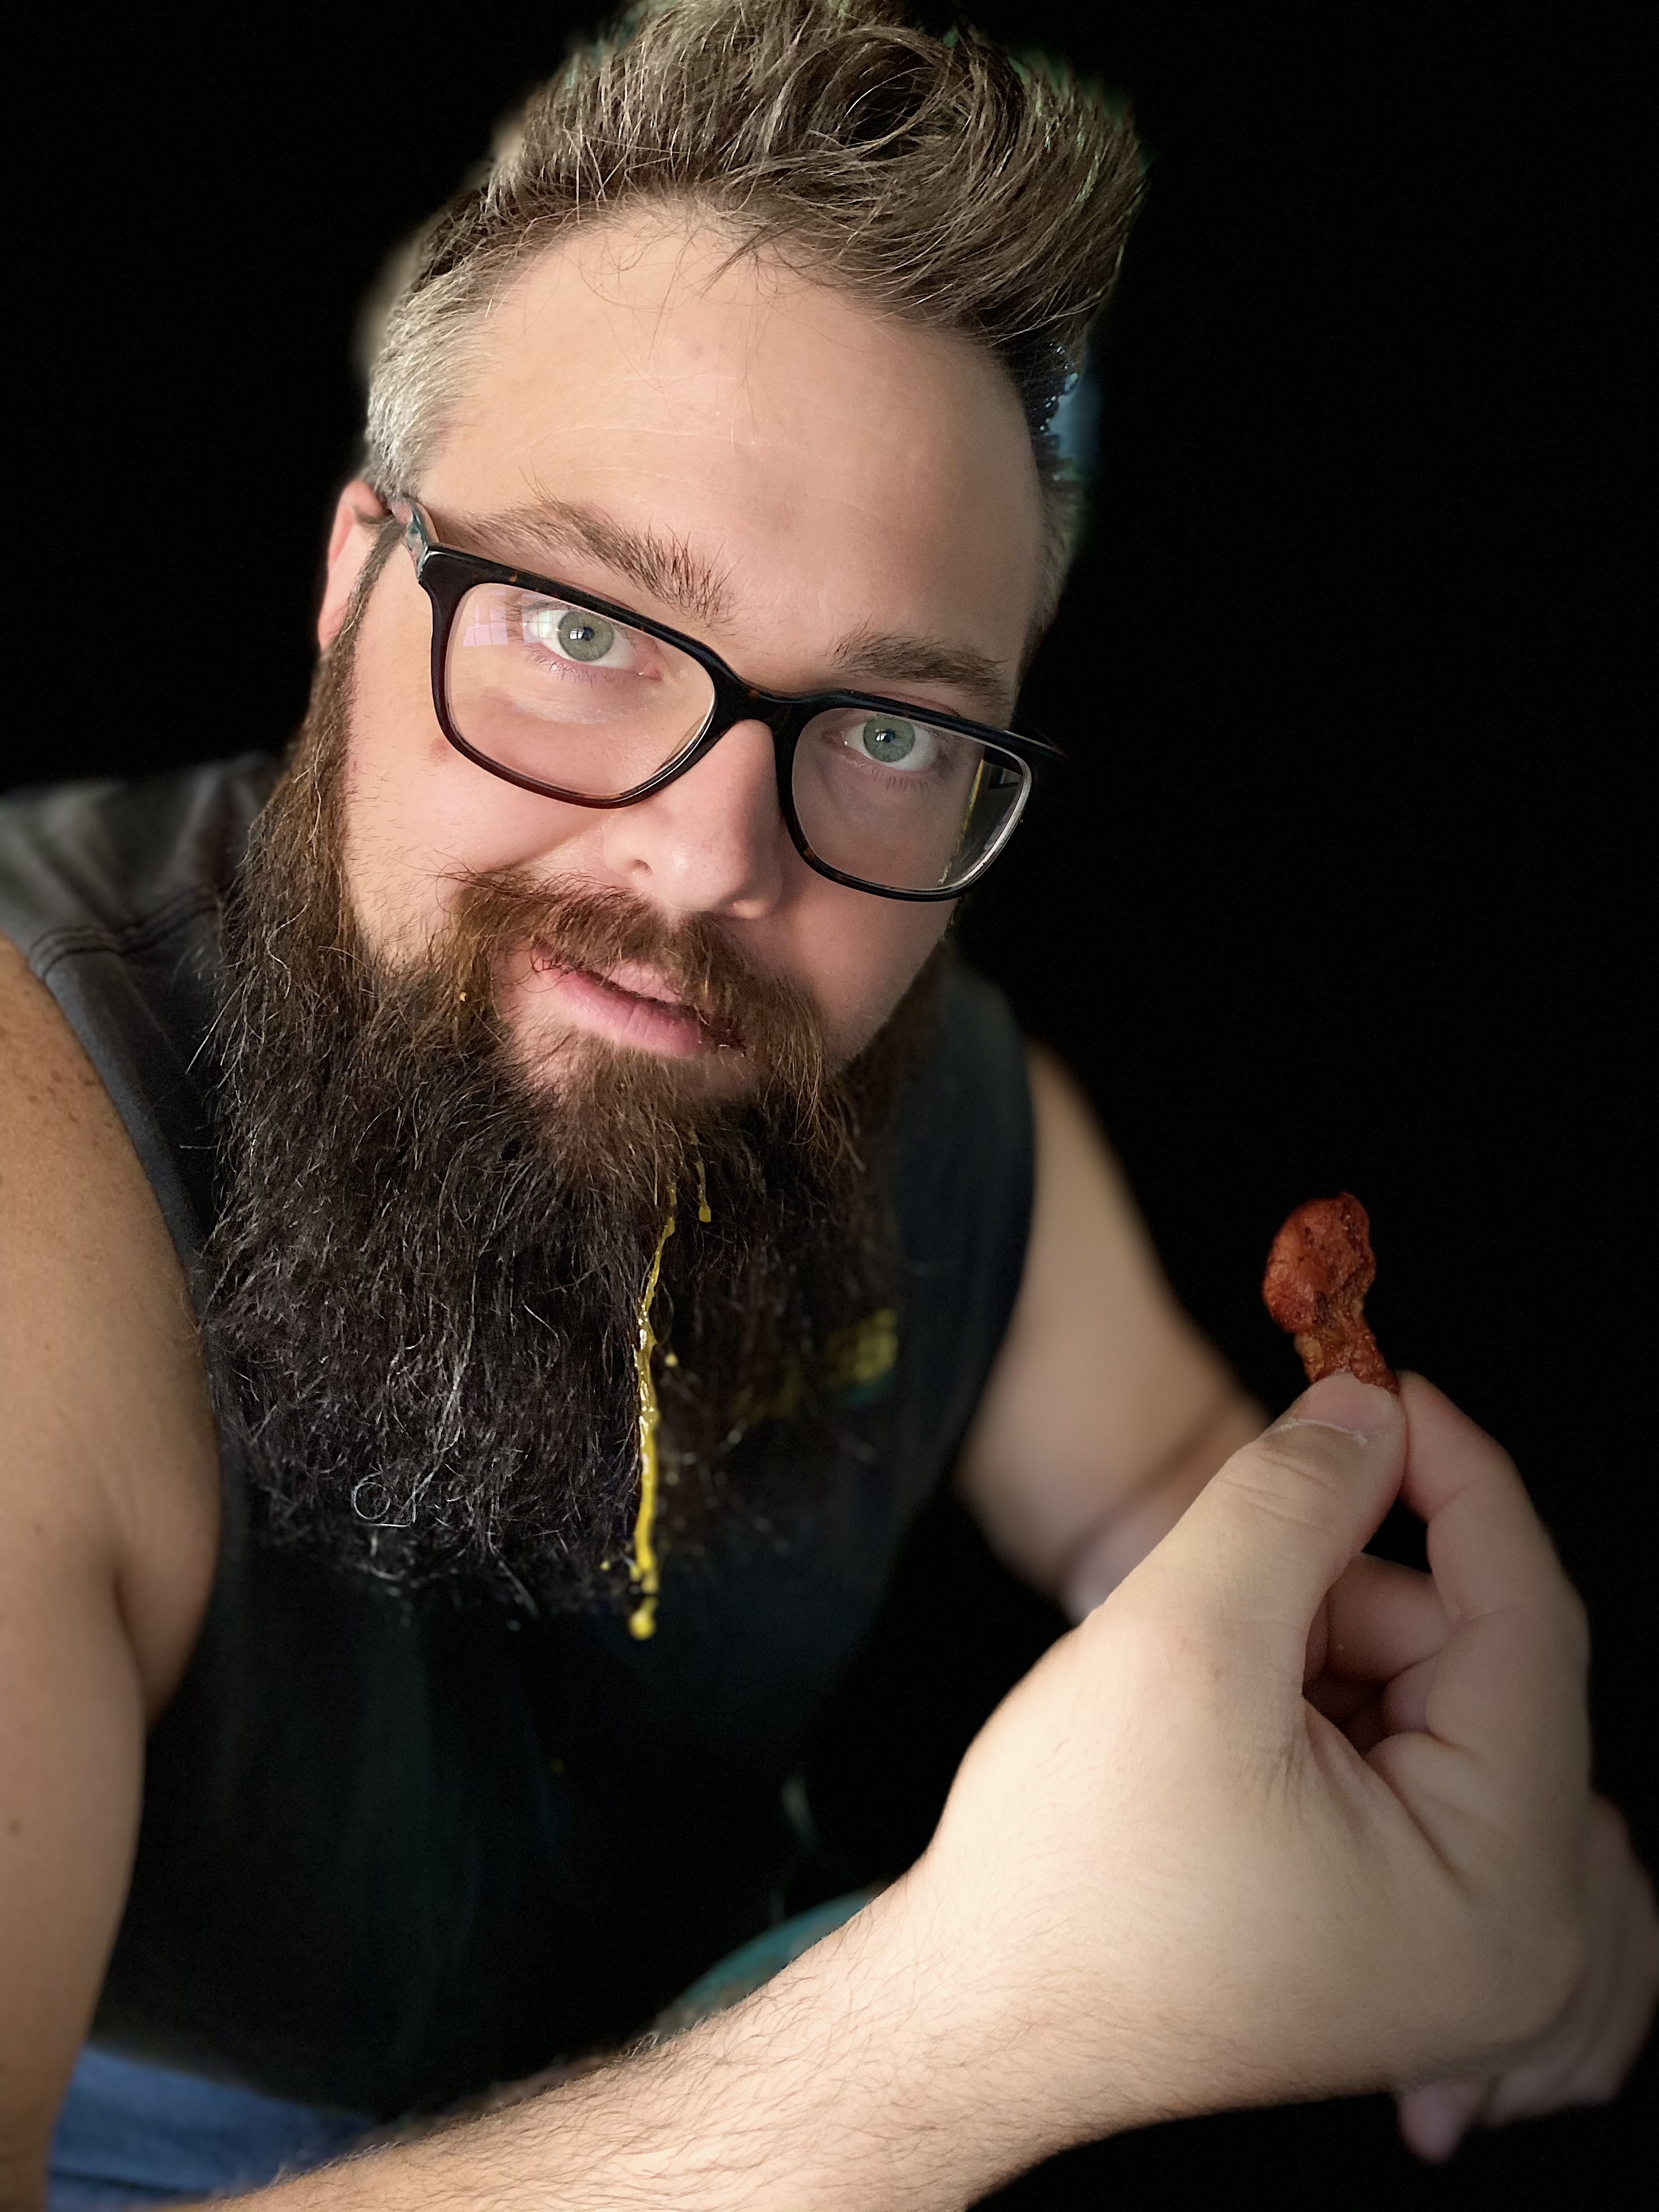 man holding a piece of bacon and posing to show the egg yolk running down his beard